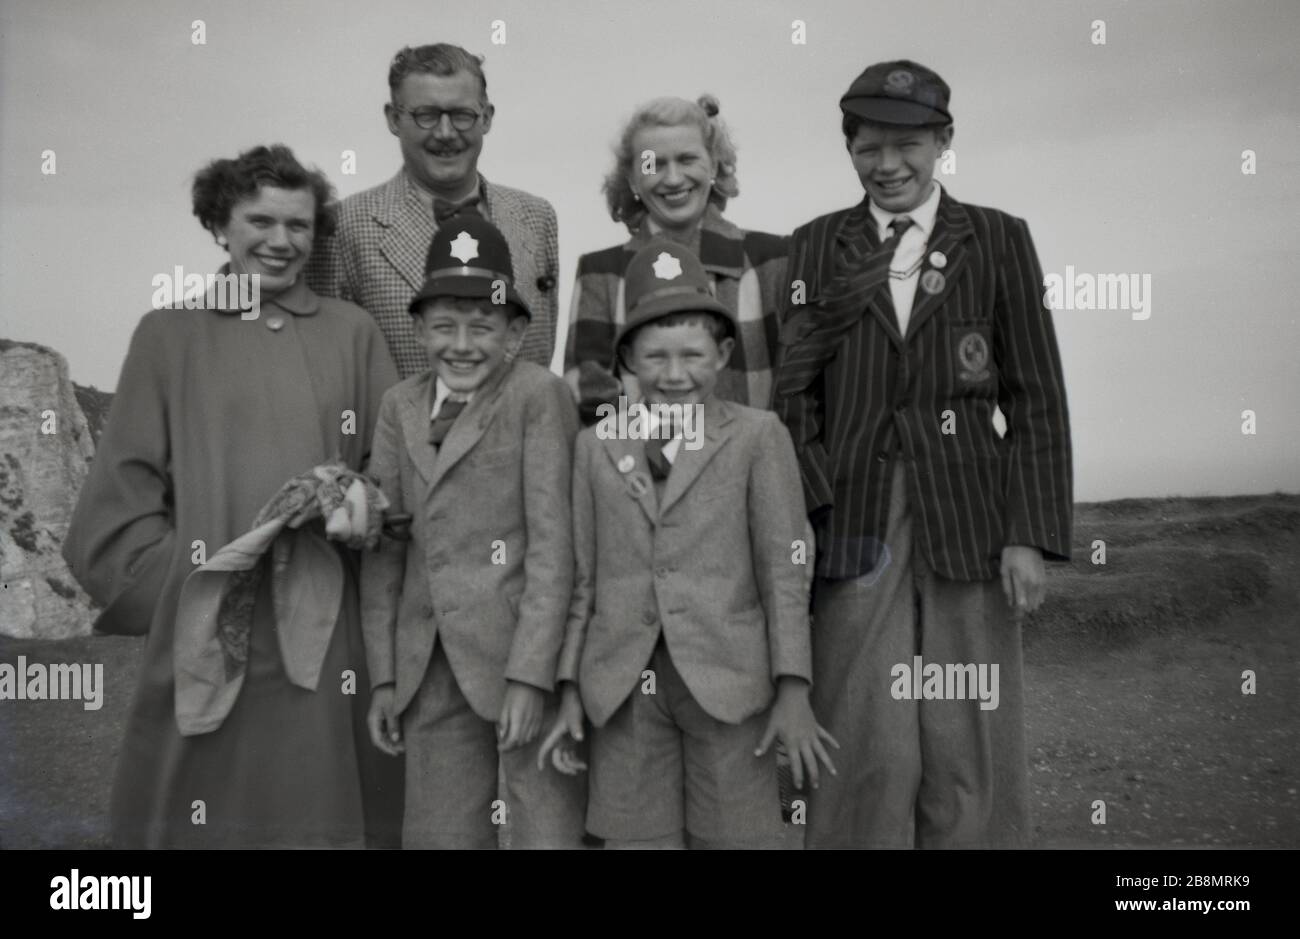 1952, historical, family photo, mum, dad and three boys in their school uniform, with the two youngest having fun wearing their imitation or fancy dress police helmets, England, UK. Stock Photo